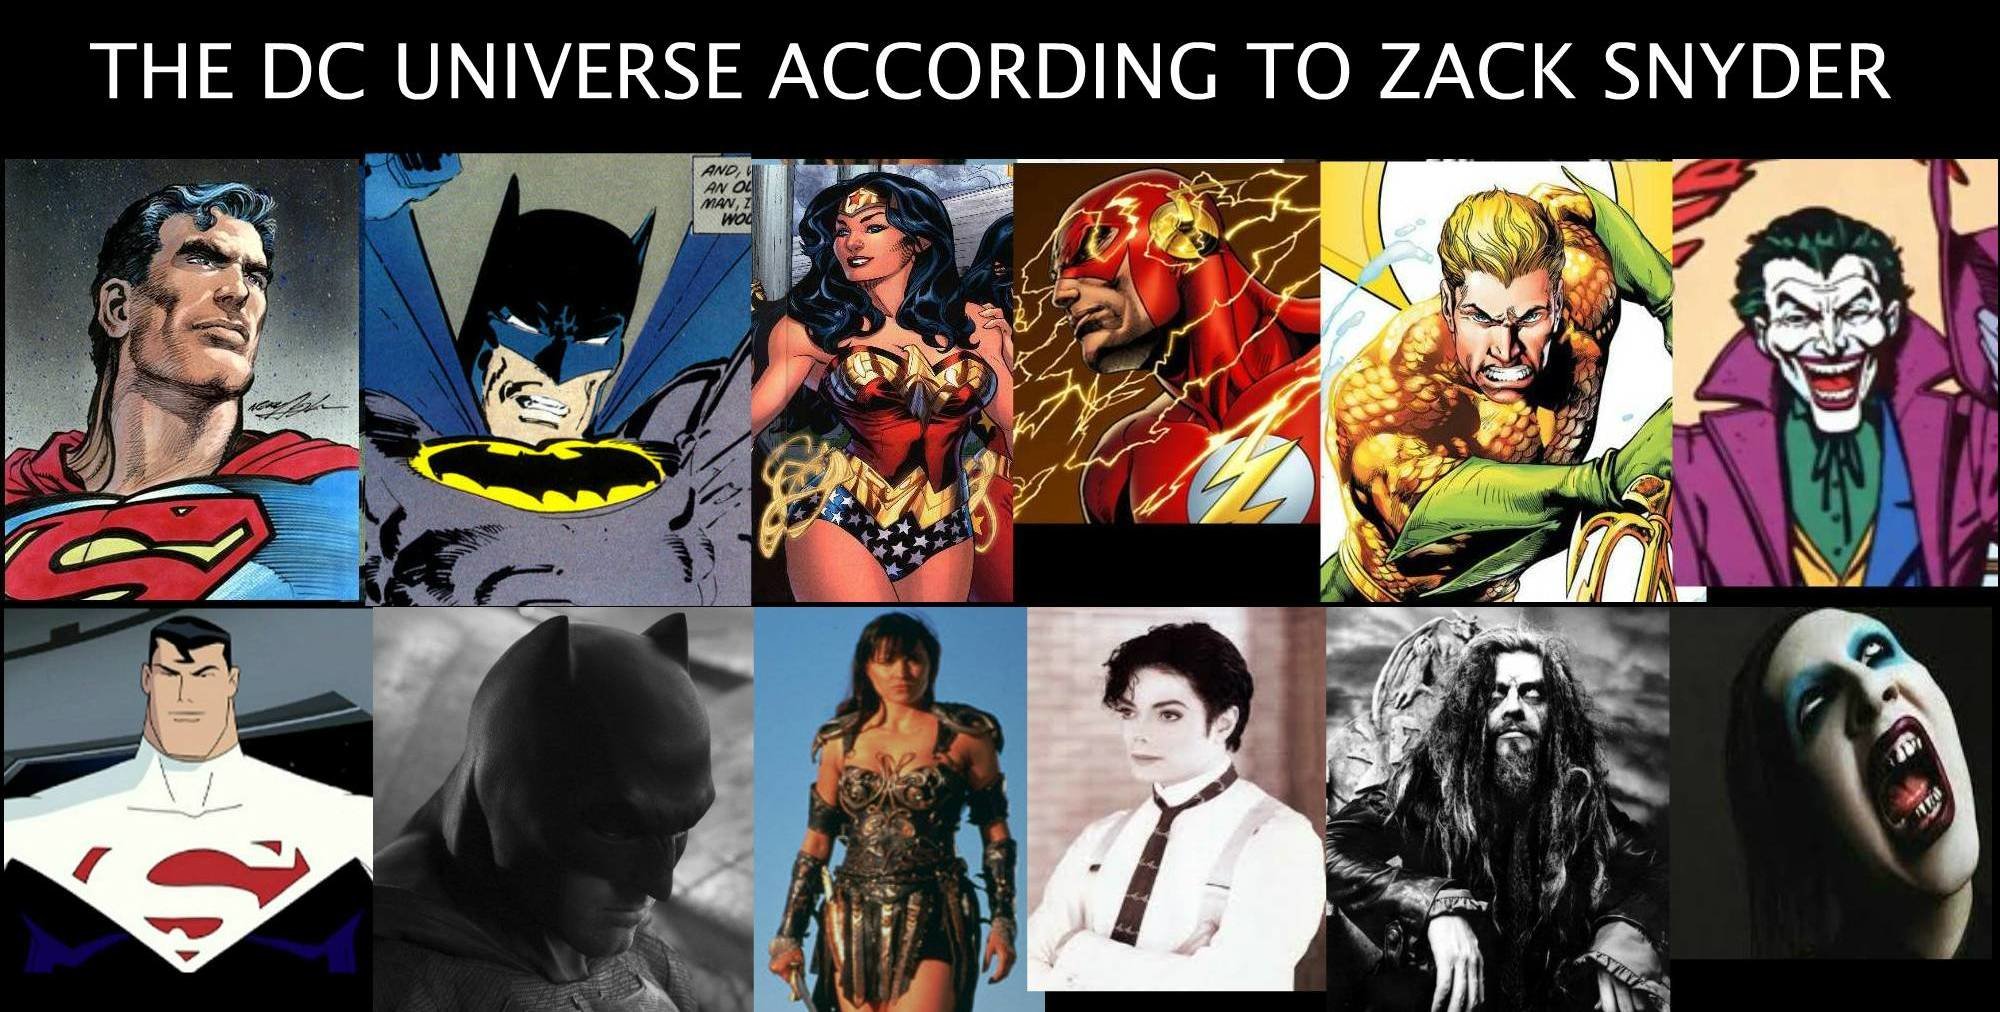 the-dc-universe-according-to-zack-snyder-2-133359.jpg